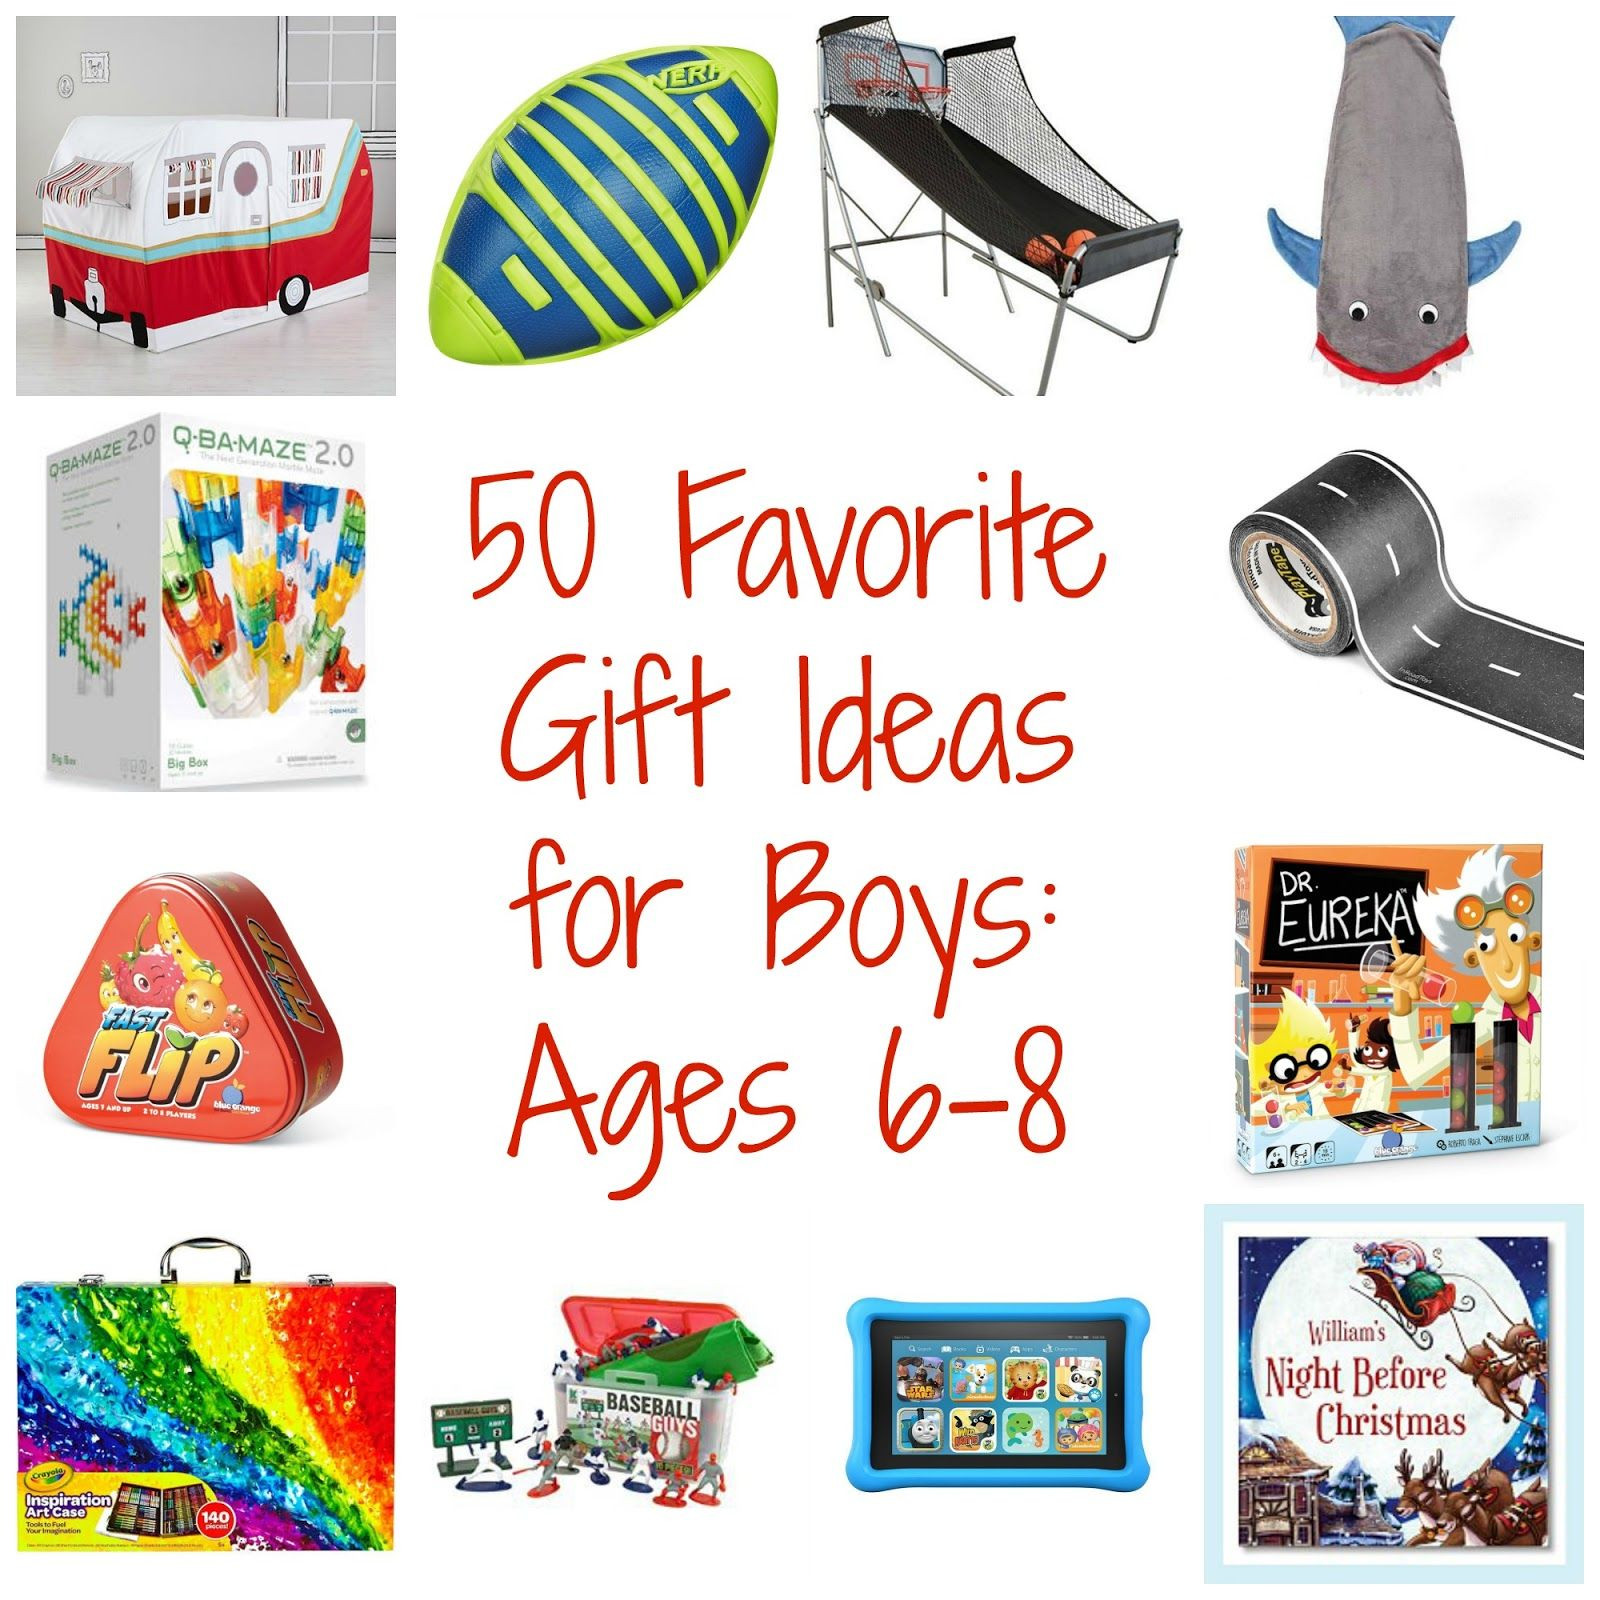 Xmas Gift Ideas For Boys
 50 Favorite Gift Ideas for Boys Ages 6 8 The Chirping